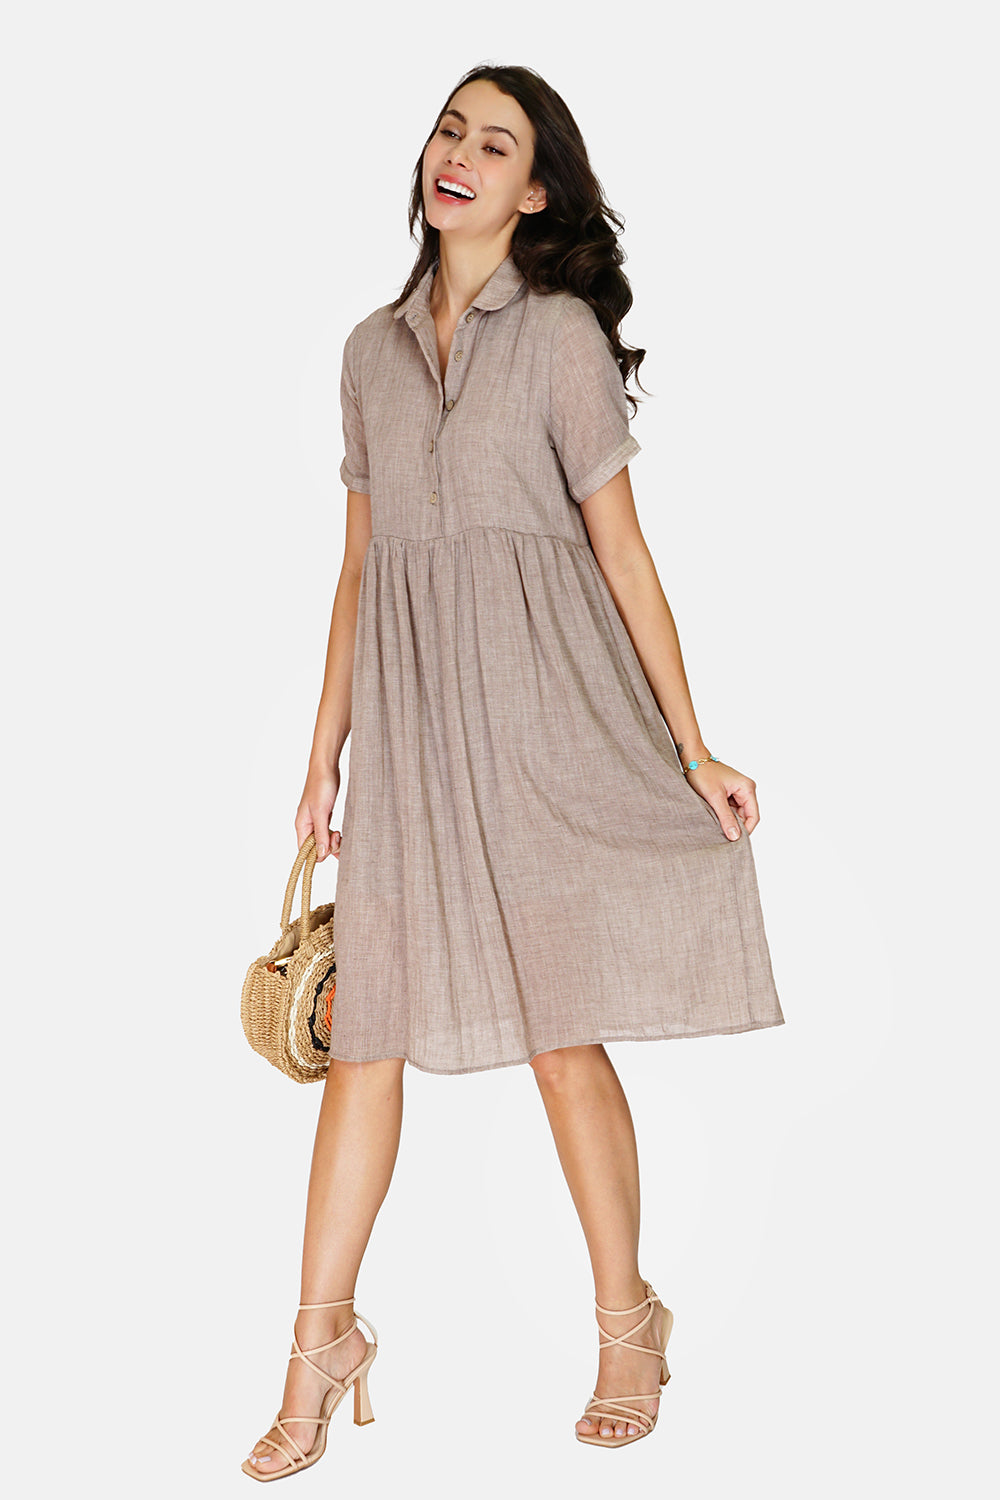 Long dress with shirt collar, buttoned front, short sleeves